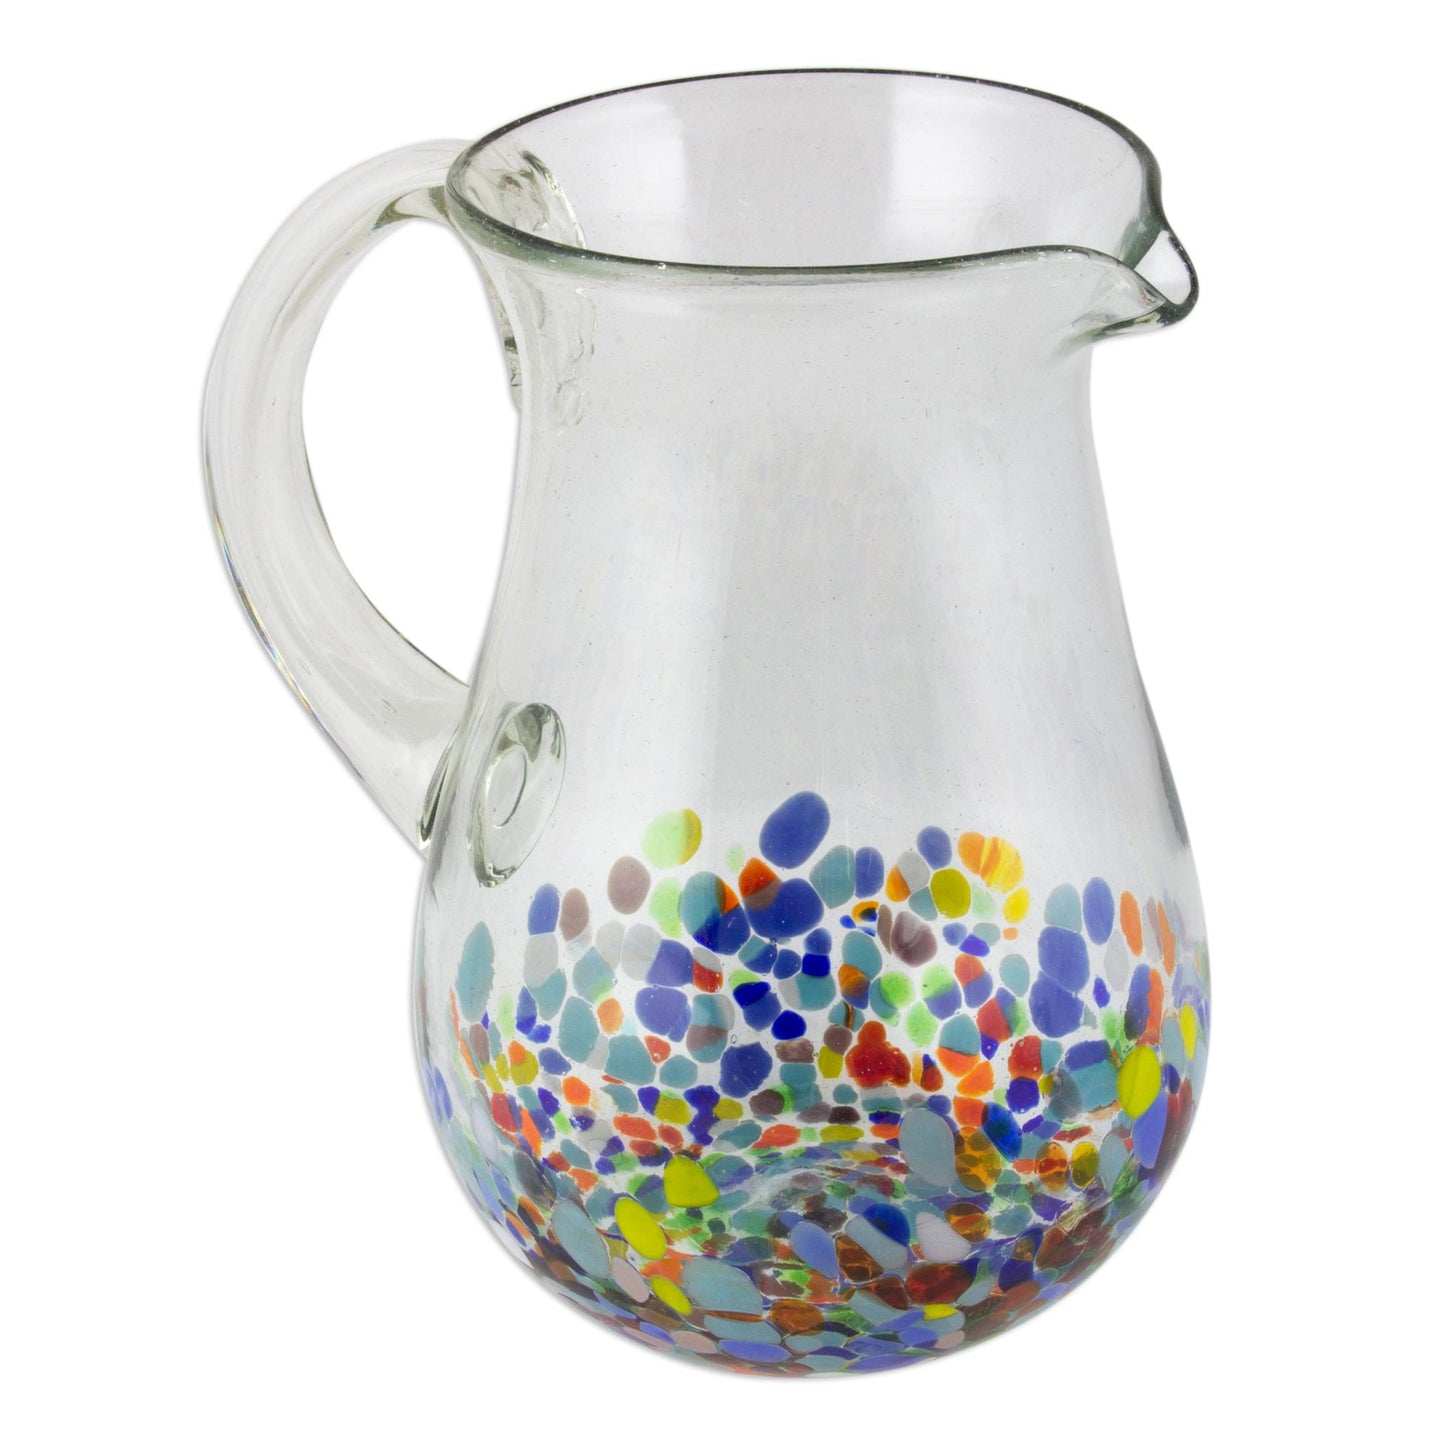 Confetti Festival Artisan Crafted Colorful Mexican Hand Blown Pitcher (87 oz)